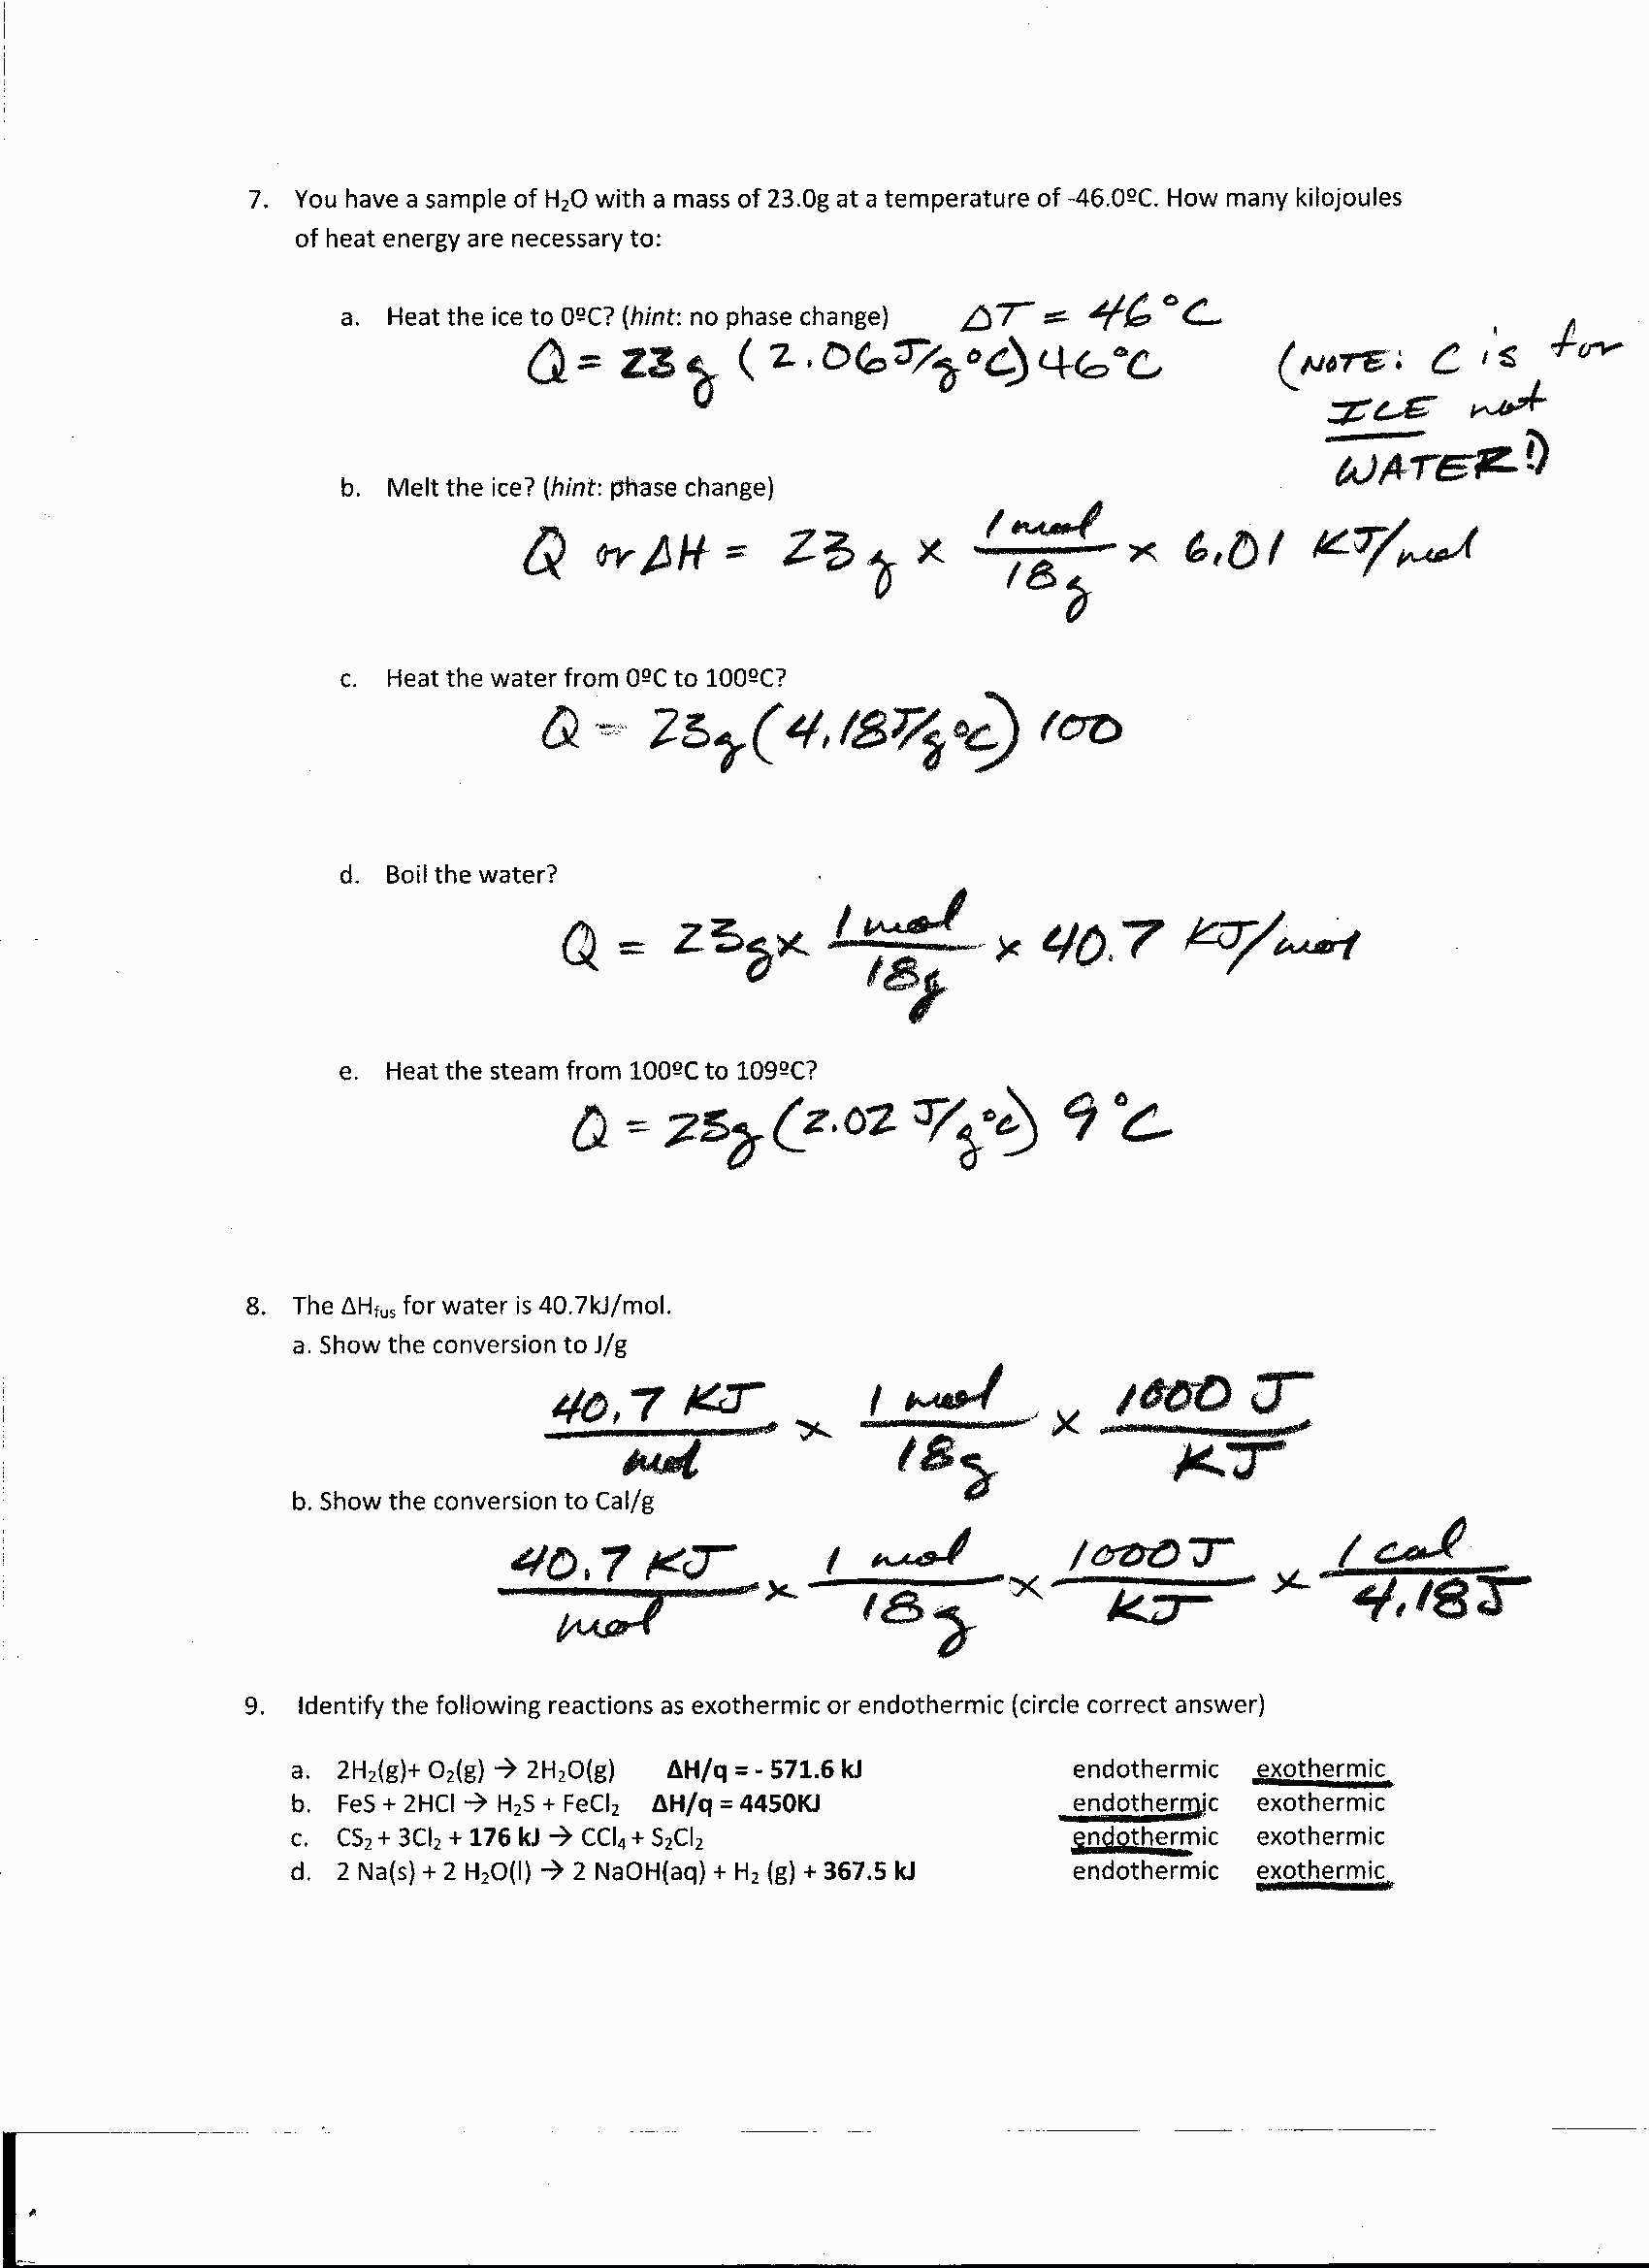 Heat Transfer Worksheet Pdf together with Heat Transfer Worksheet Answers Choice Image Worksheet for Kids